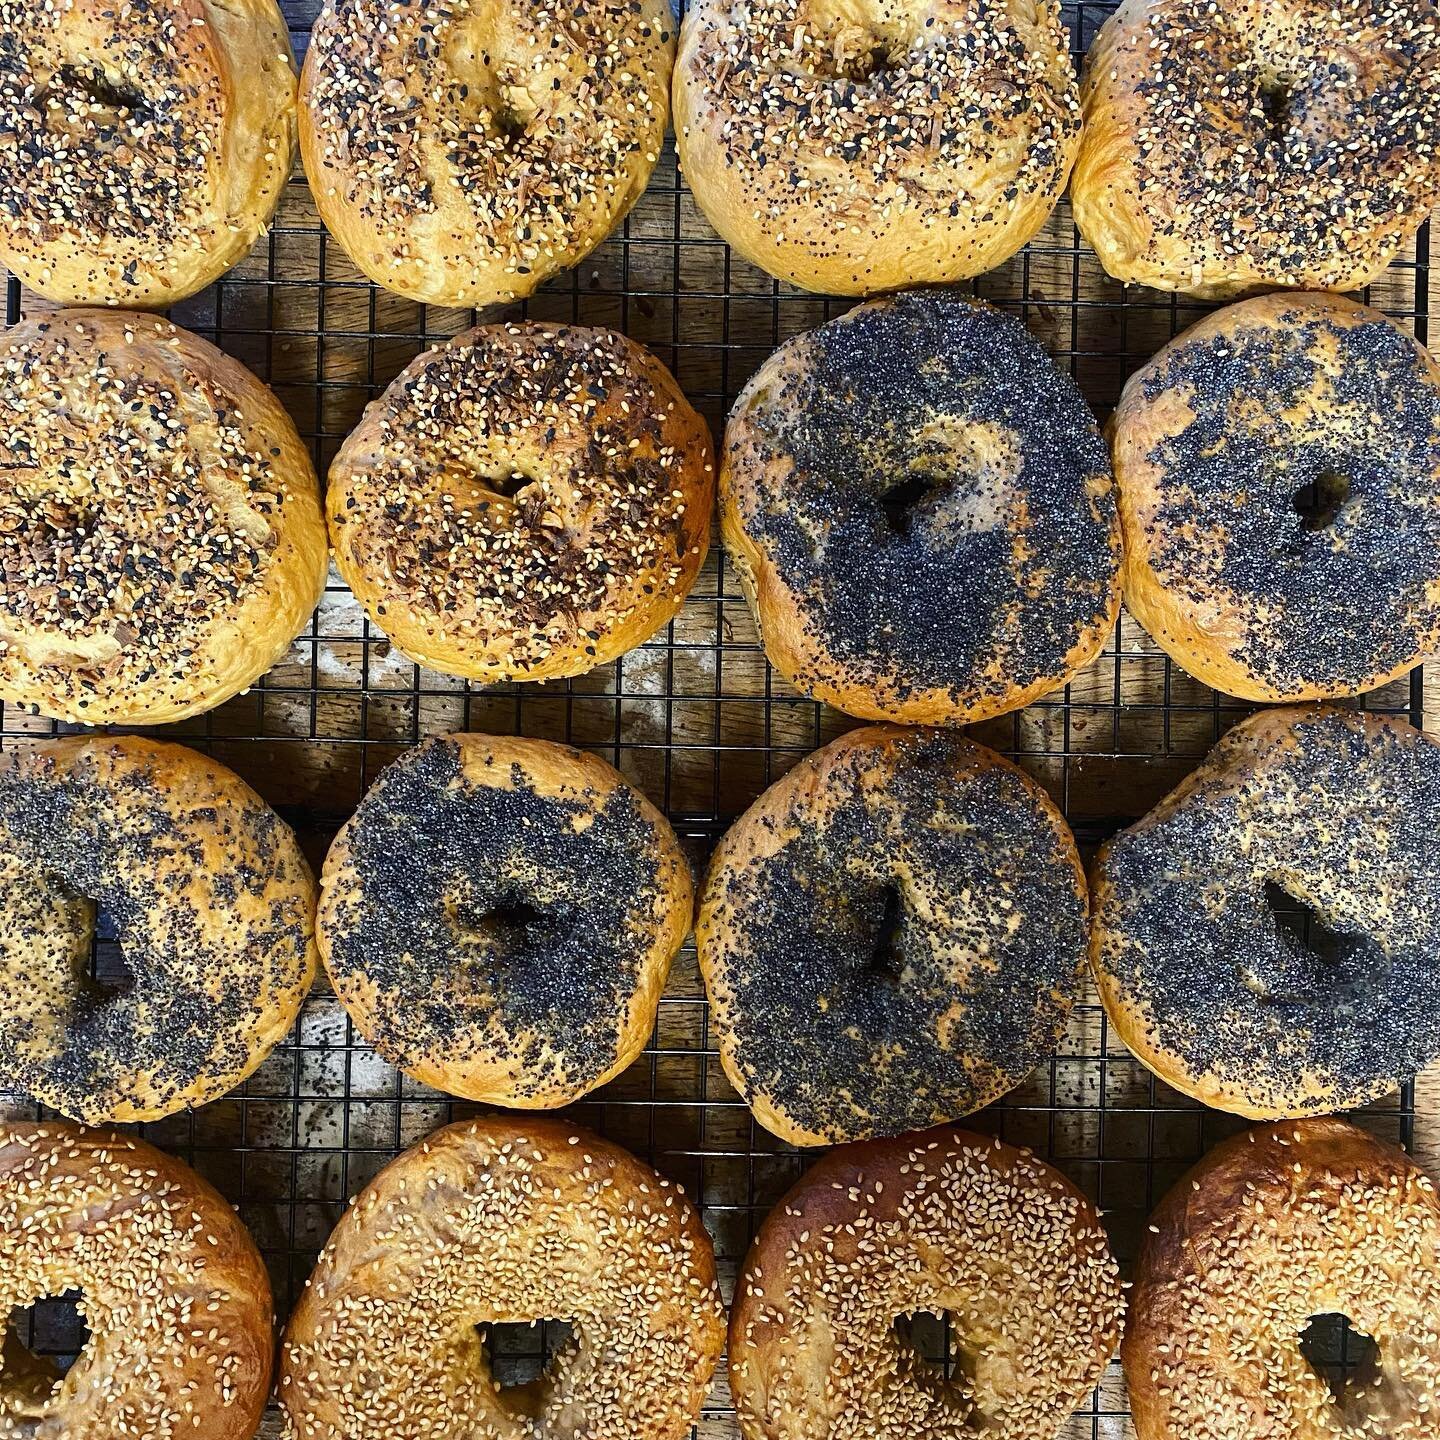 Is baking a big batch of bagels the Yom Kippur equivalent of counting your chickens before they hatch? Oh, well. I may be mostly godless, but I do believe in bagels. Gmar Chatimah Tovah!